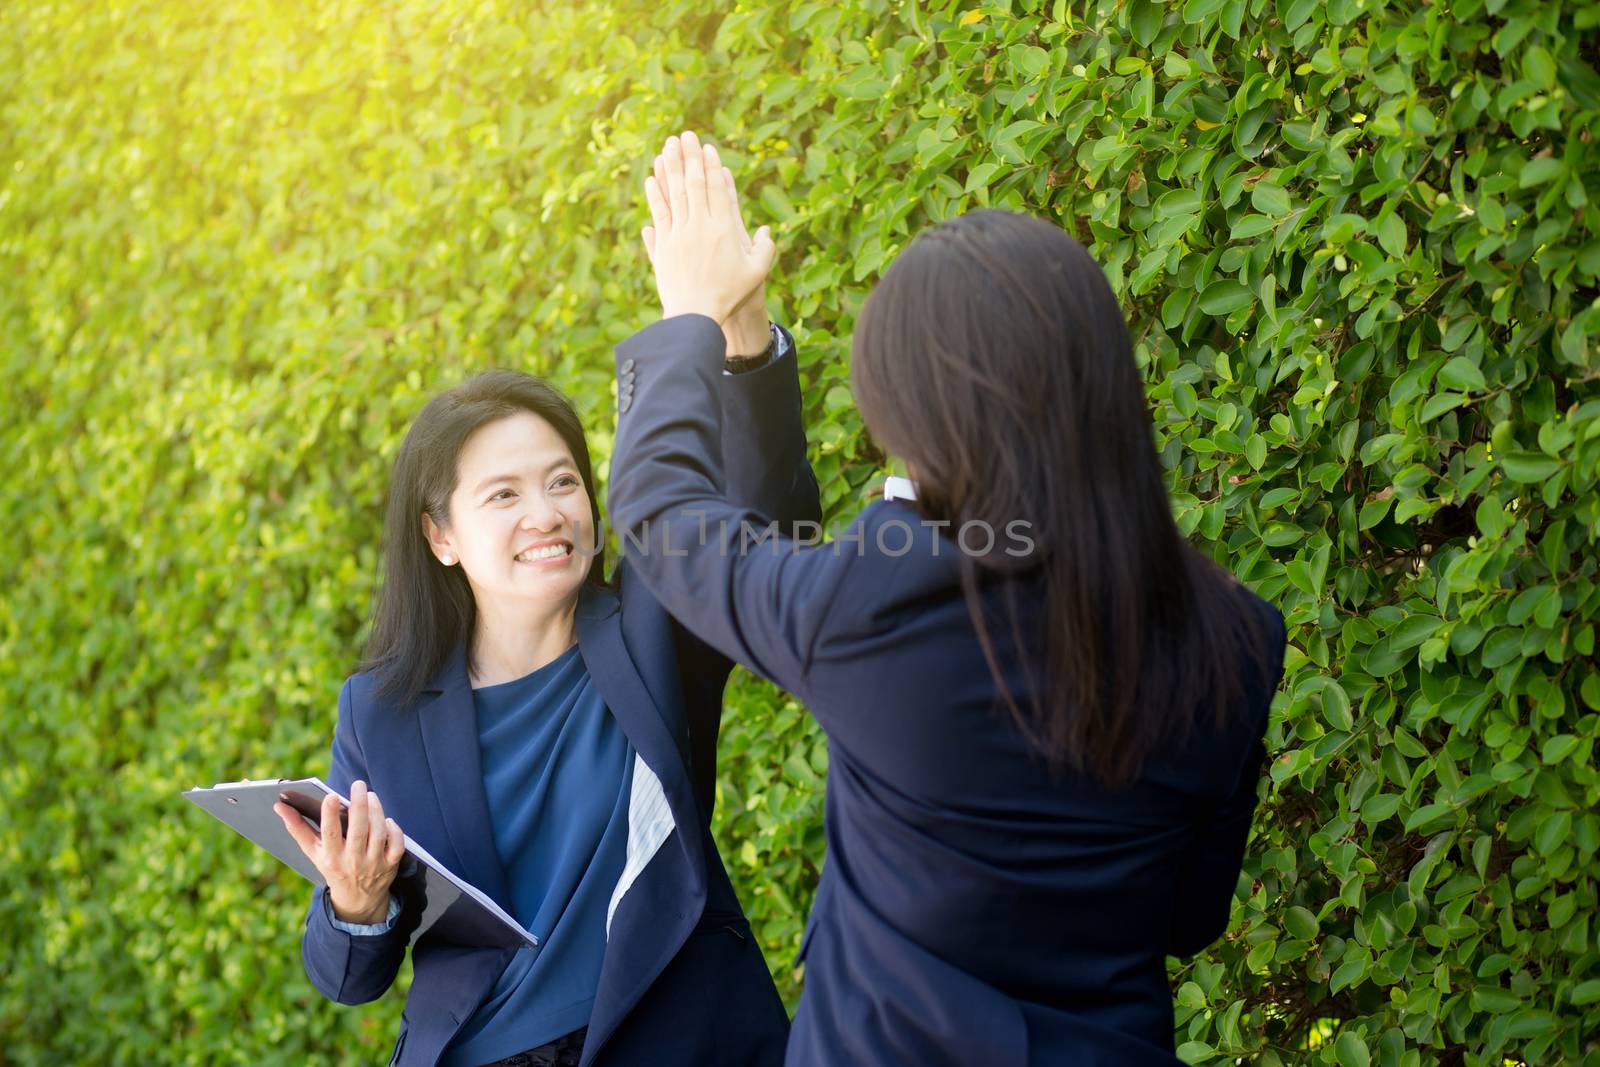 Businesswoman two people high fiving outdoors nature background. by nnudoo